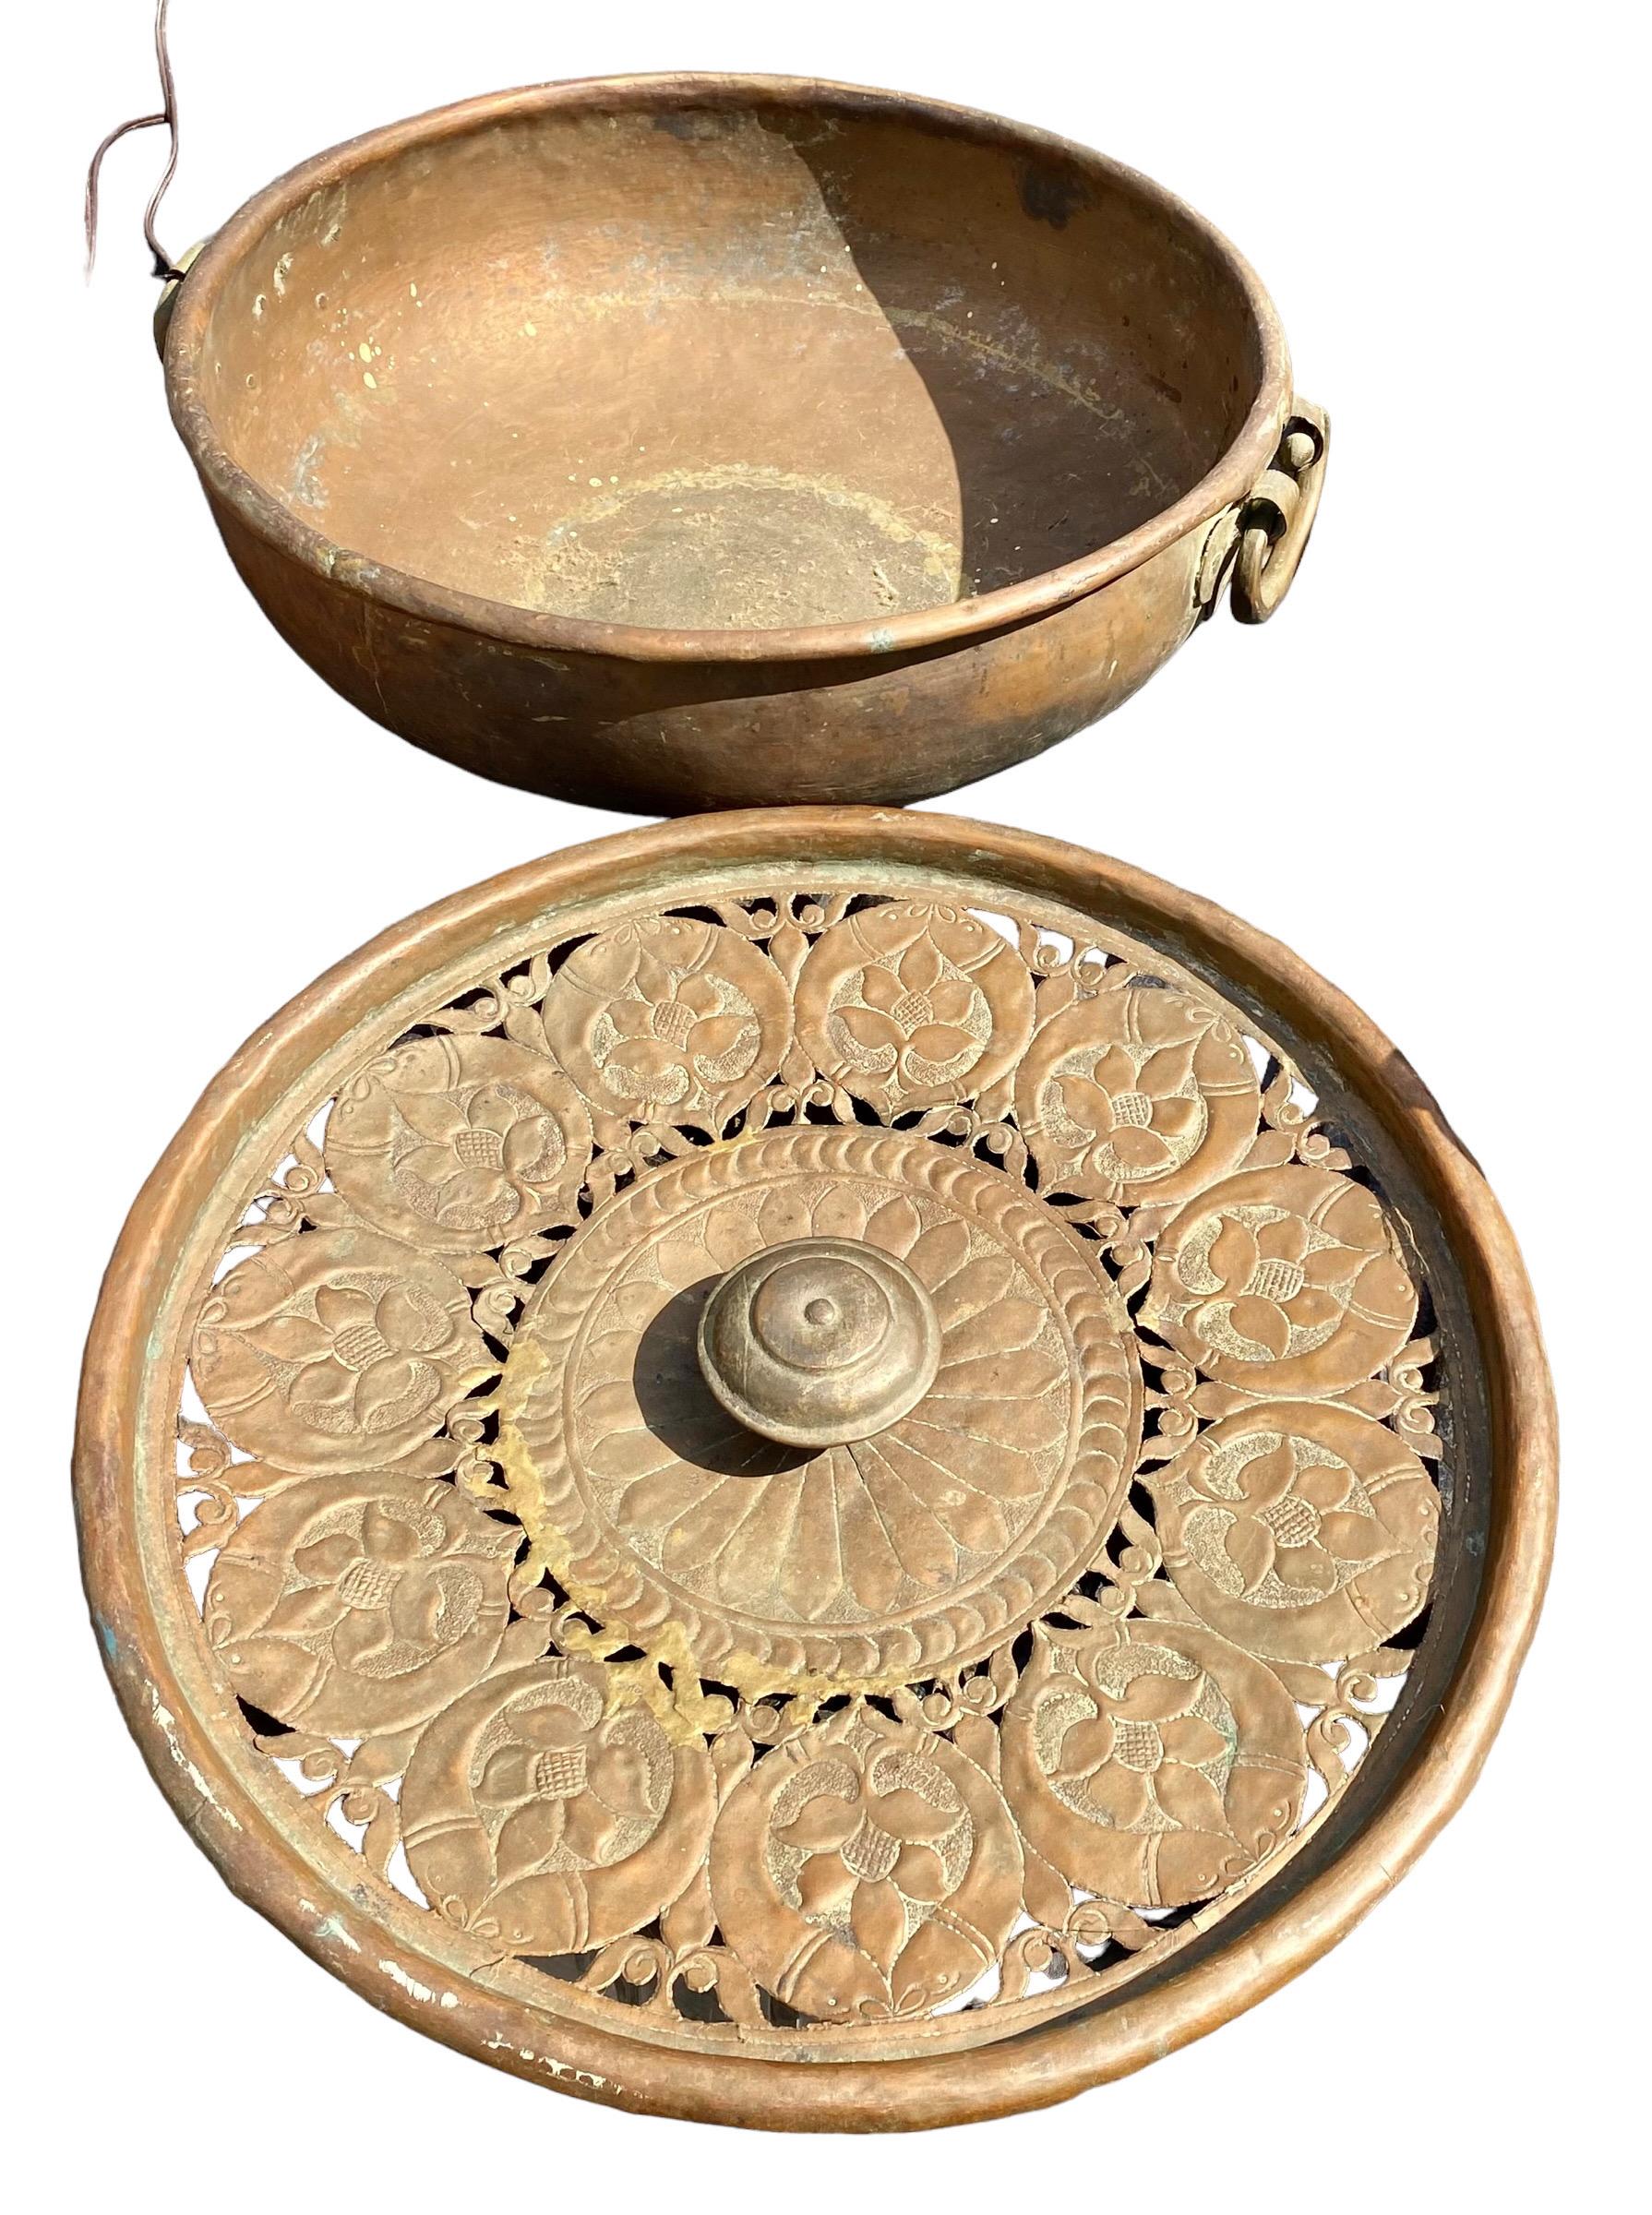 Large Antique Handcrafted Decorative Round Pierced Copper Server With Lid In Good Condition For Sale In New Orleans, LA